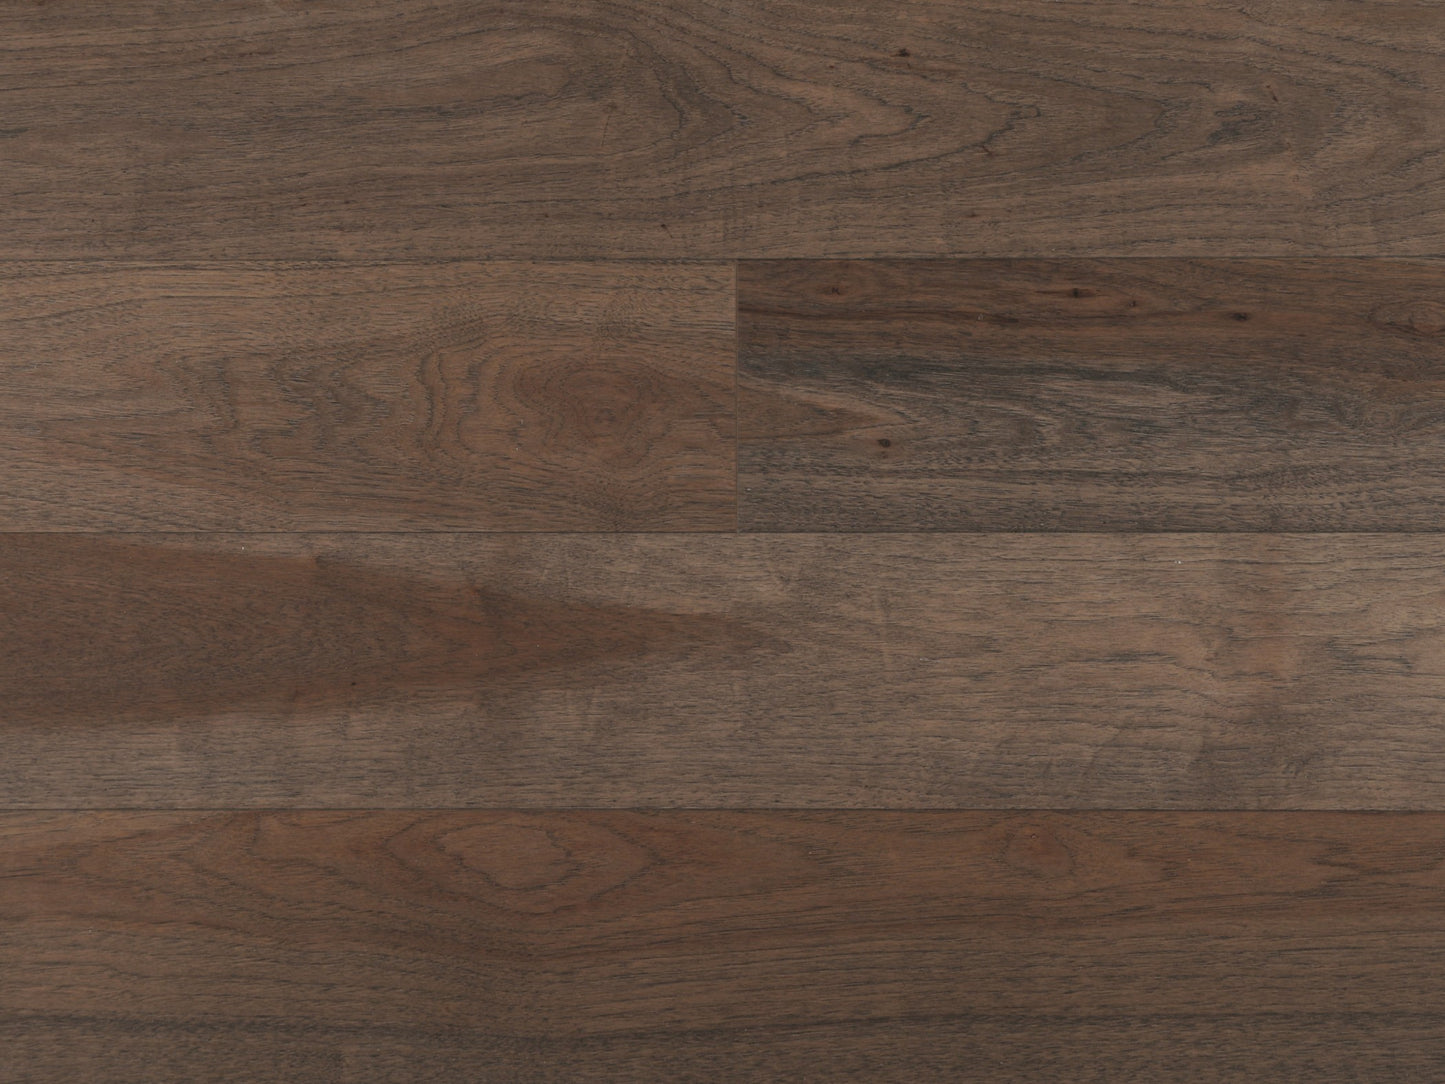 American hickory color busalla 8 x ¾ x in nail